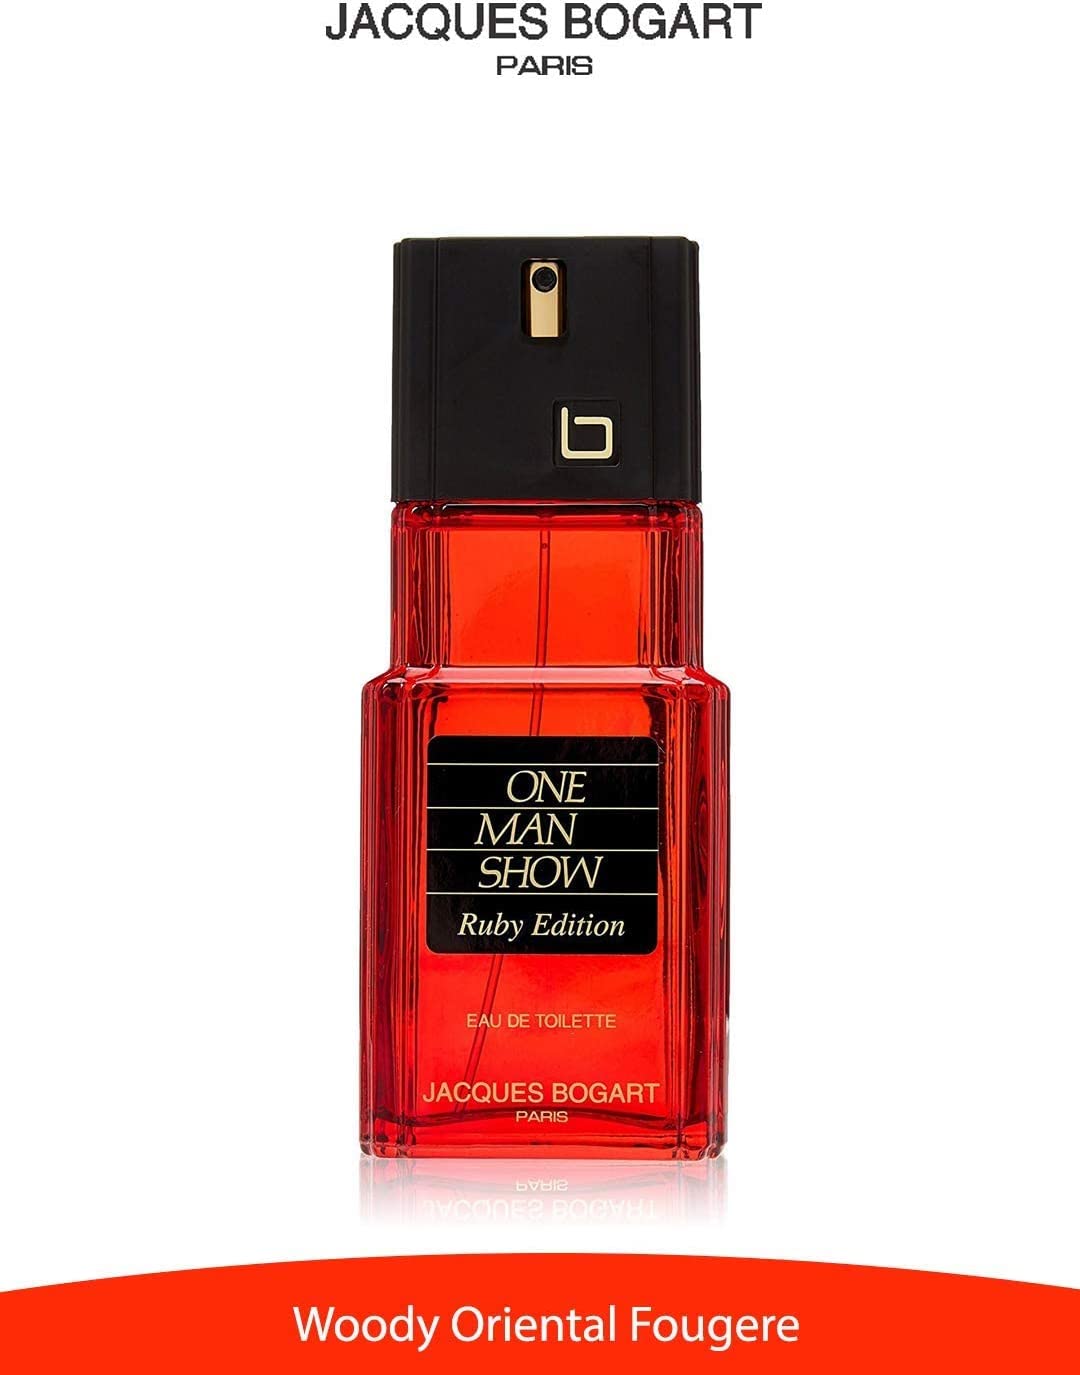 One Man Show "Ruby Edition" For Men - EDT - 100ml